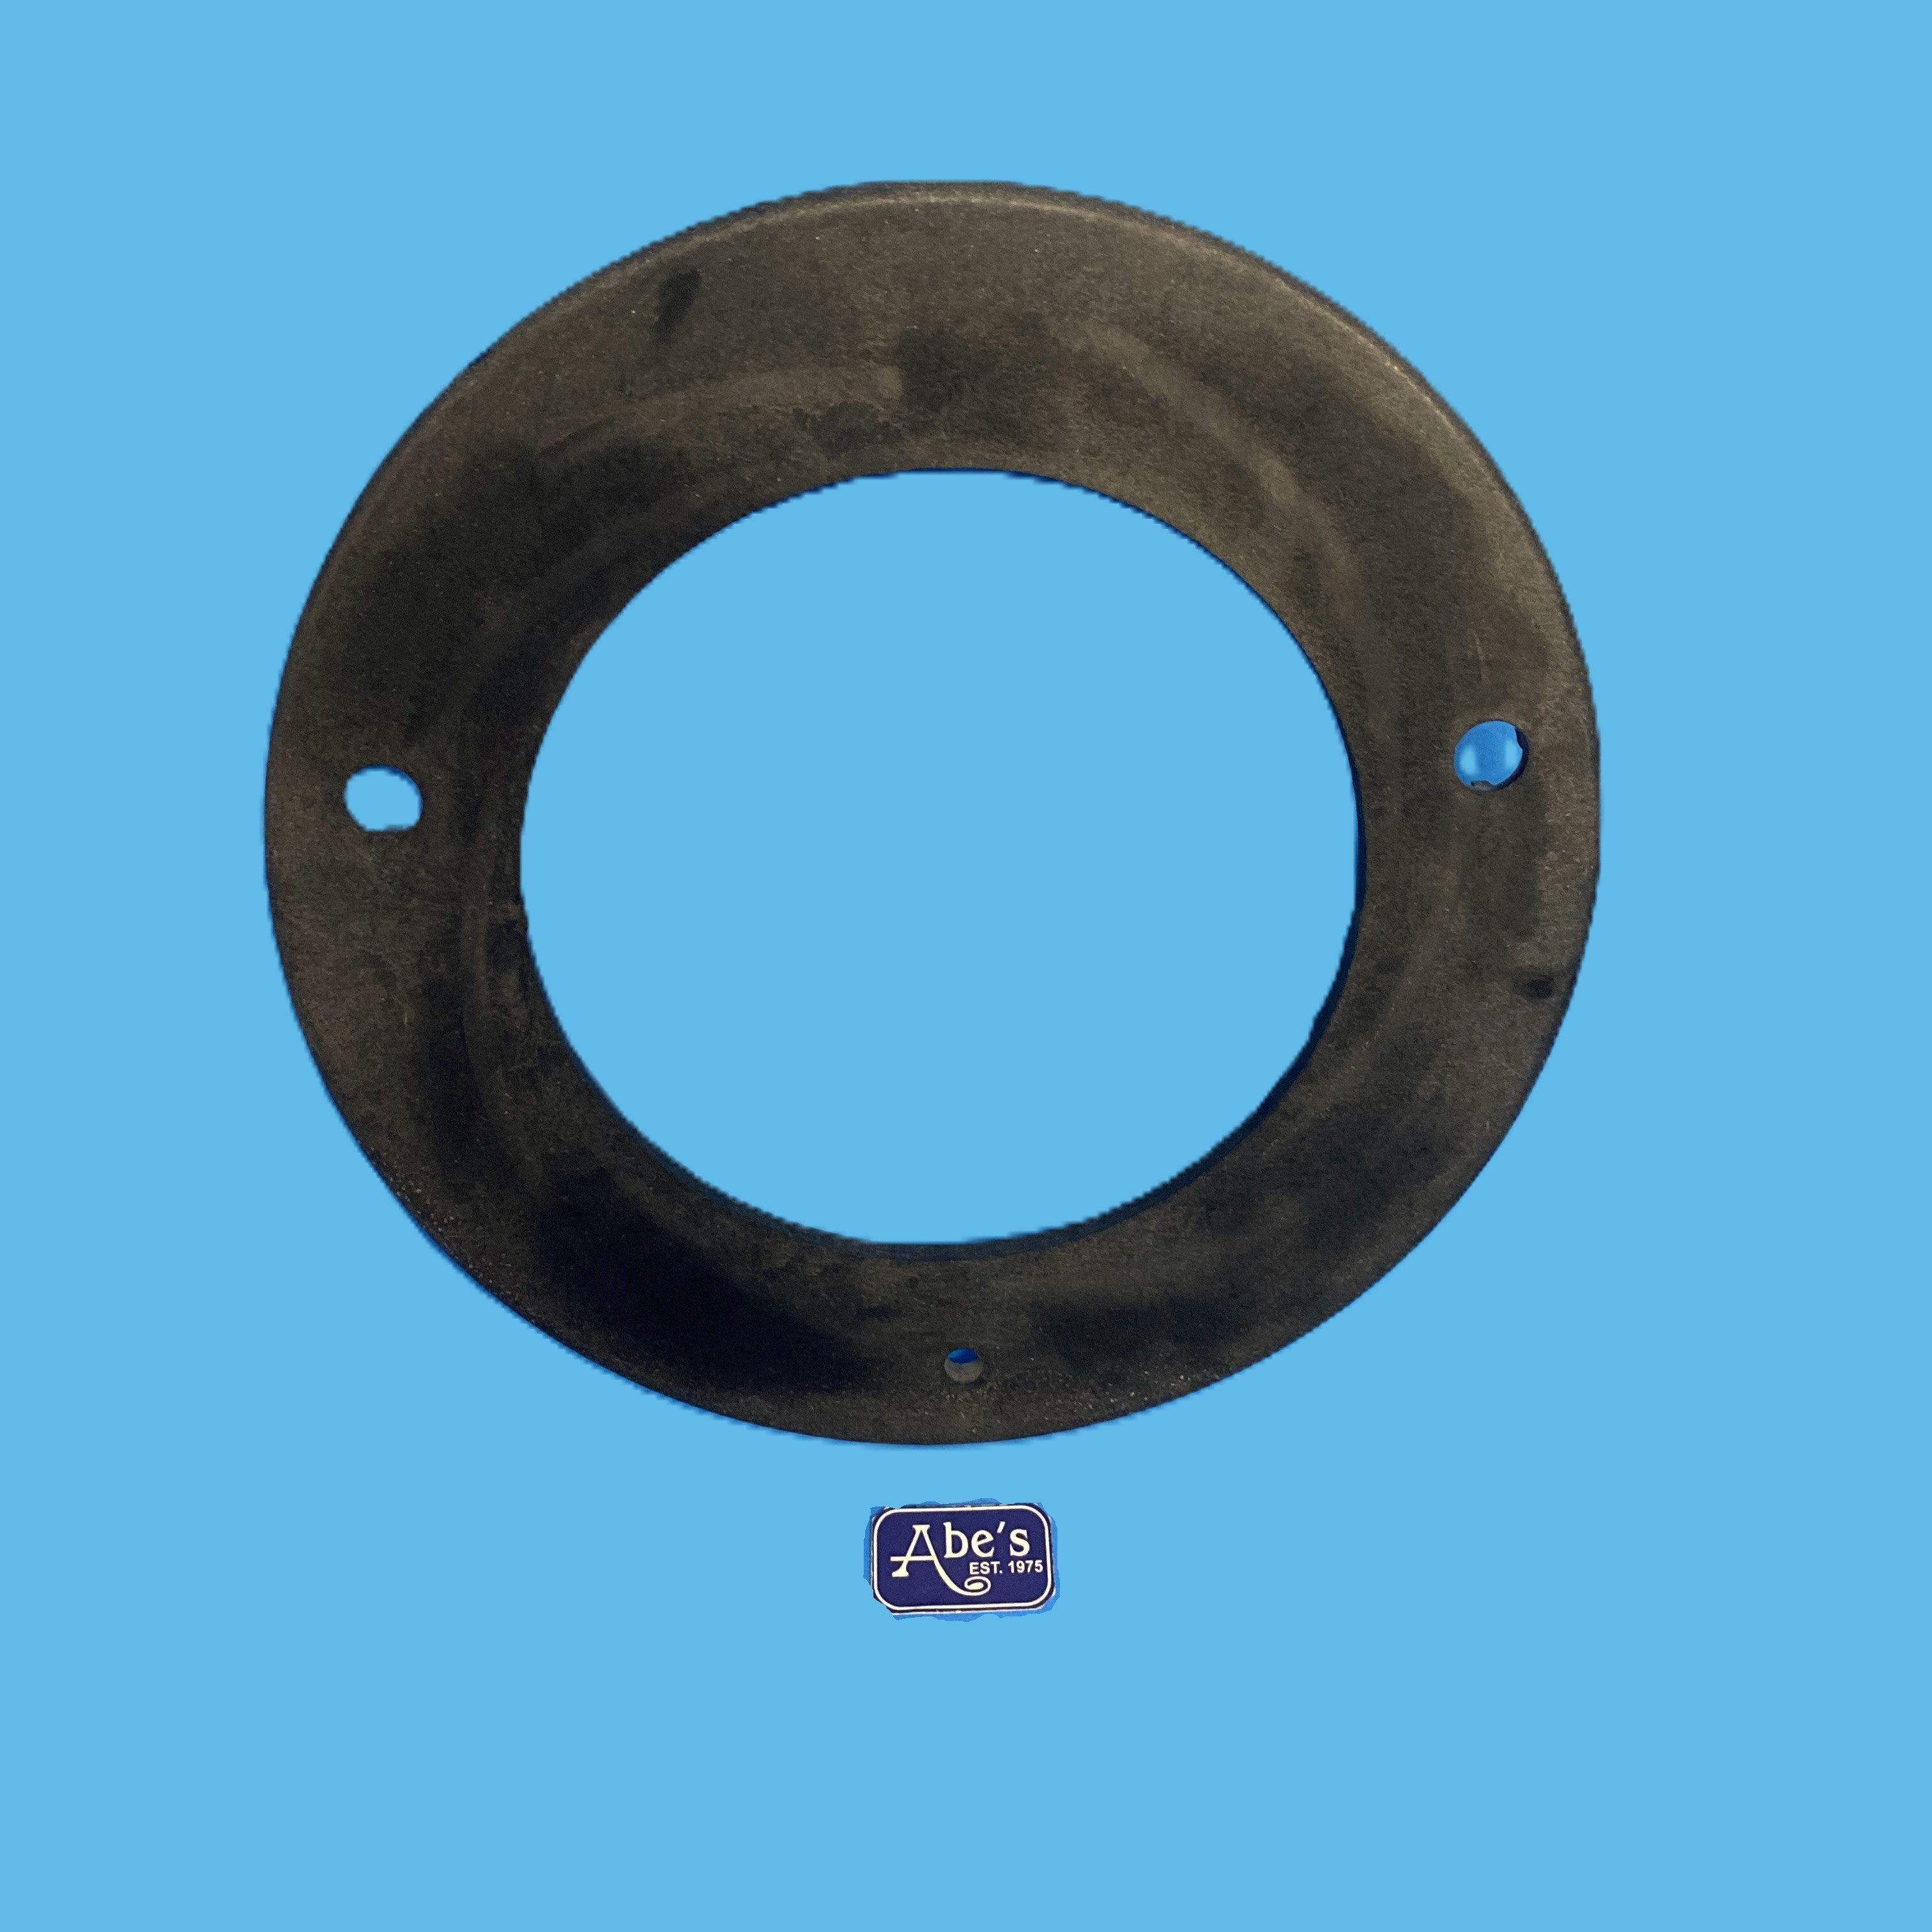 Pentair Mounting Plate for Challenger Pumps/ 355384 / Affordable $15.00 / Hard to Find Pump parts? Find Hard to Find Parts at Abe's Pools & Spas